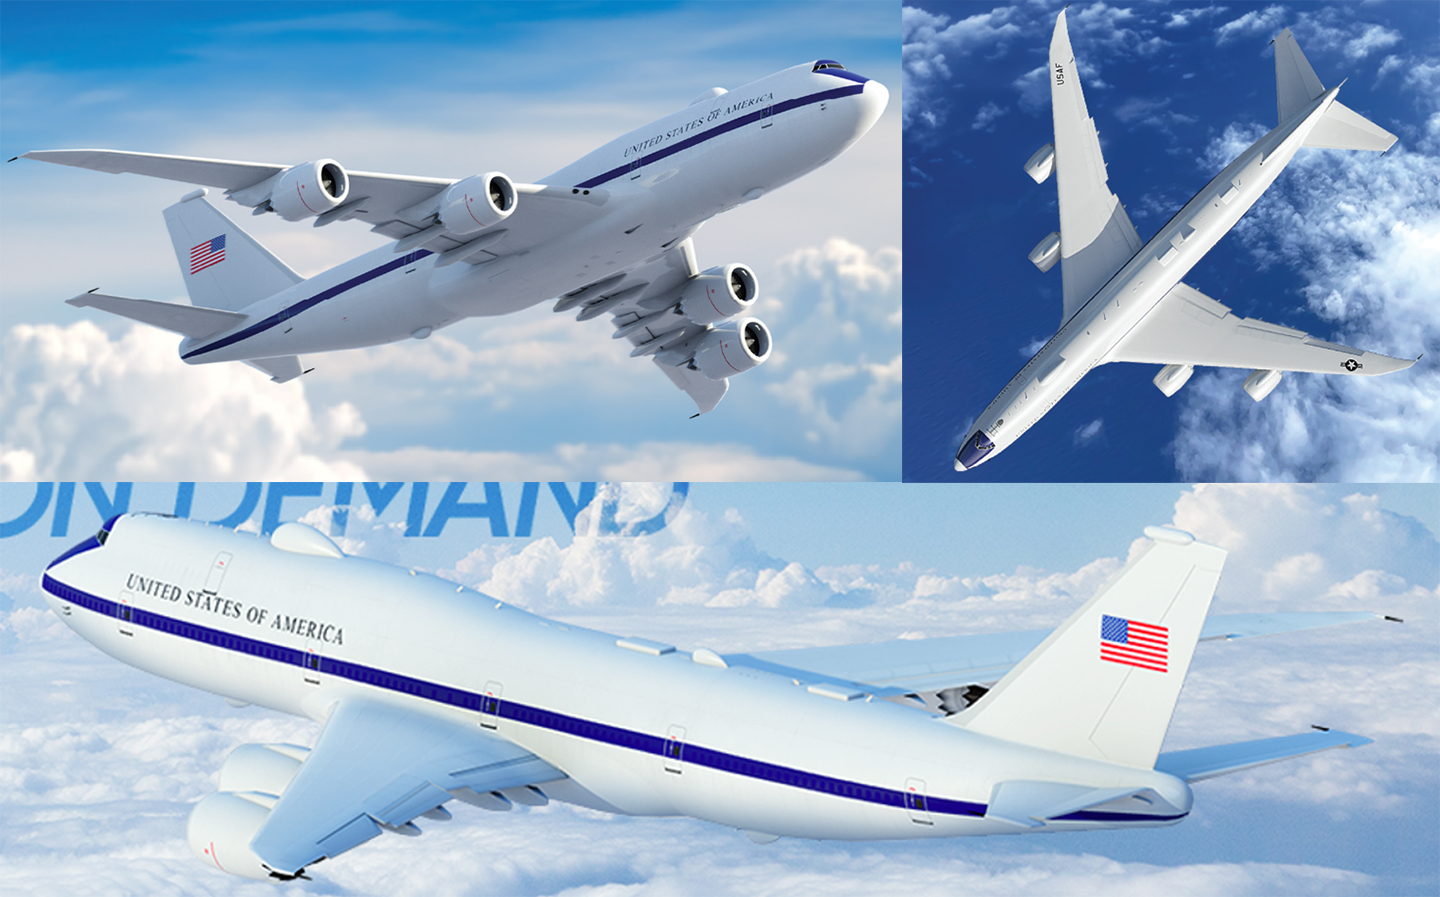 SAOC will replace the E-4B, now we have a better idea of what it will look like.